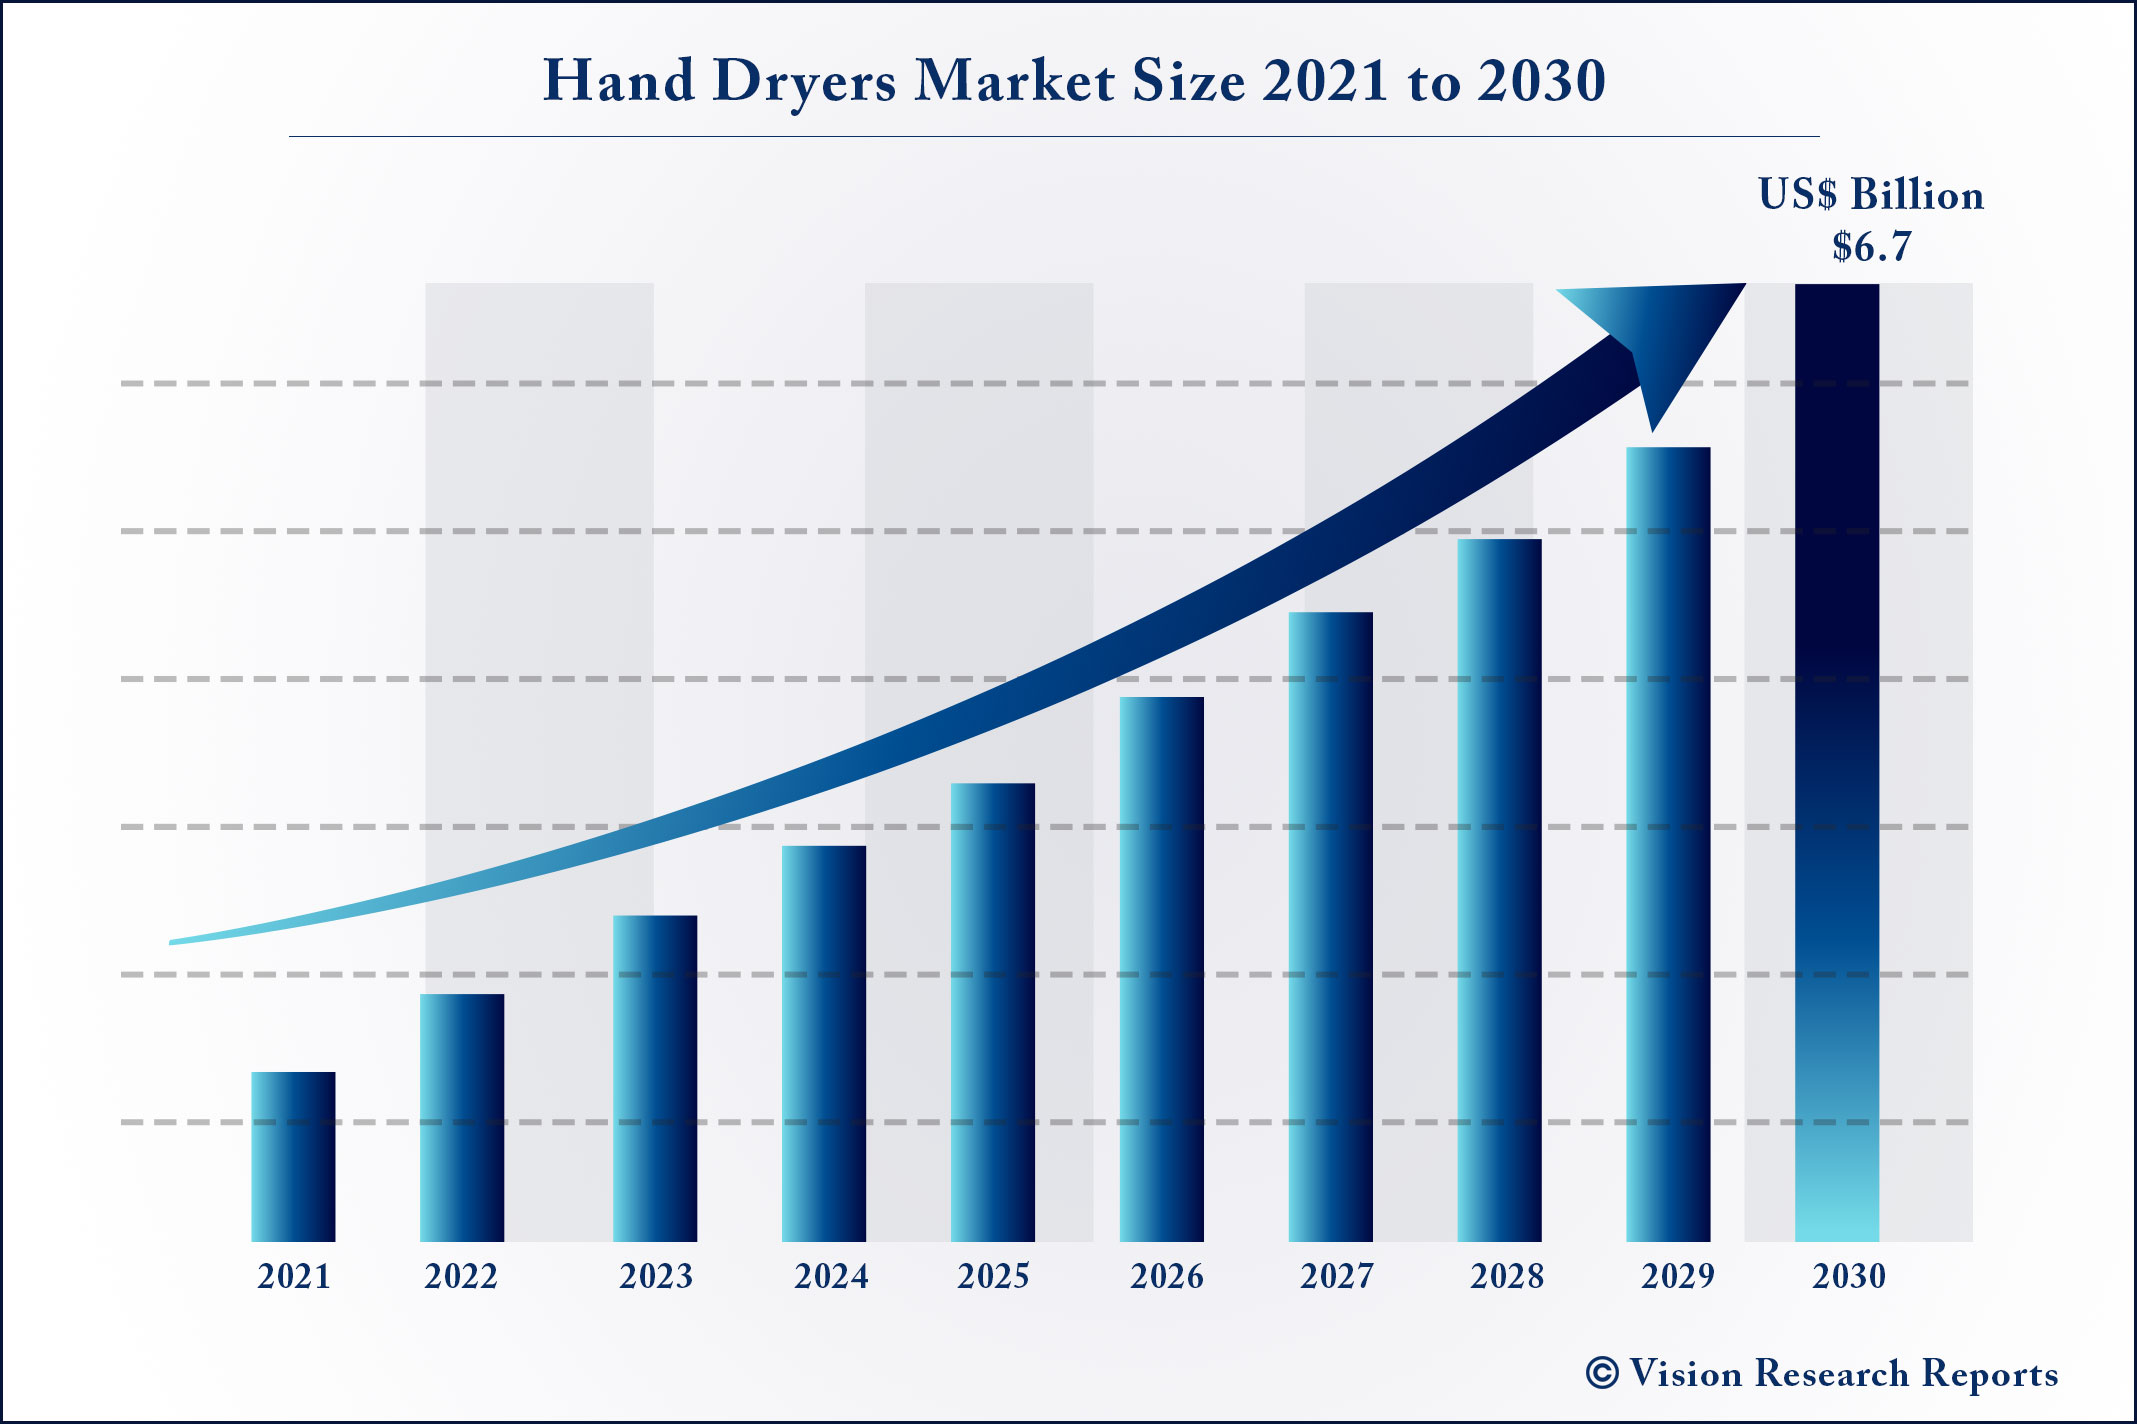 Hand Dryers Market Size 2021 to 2030